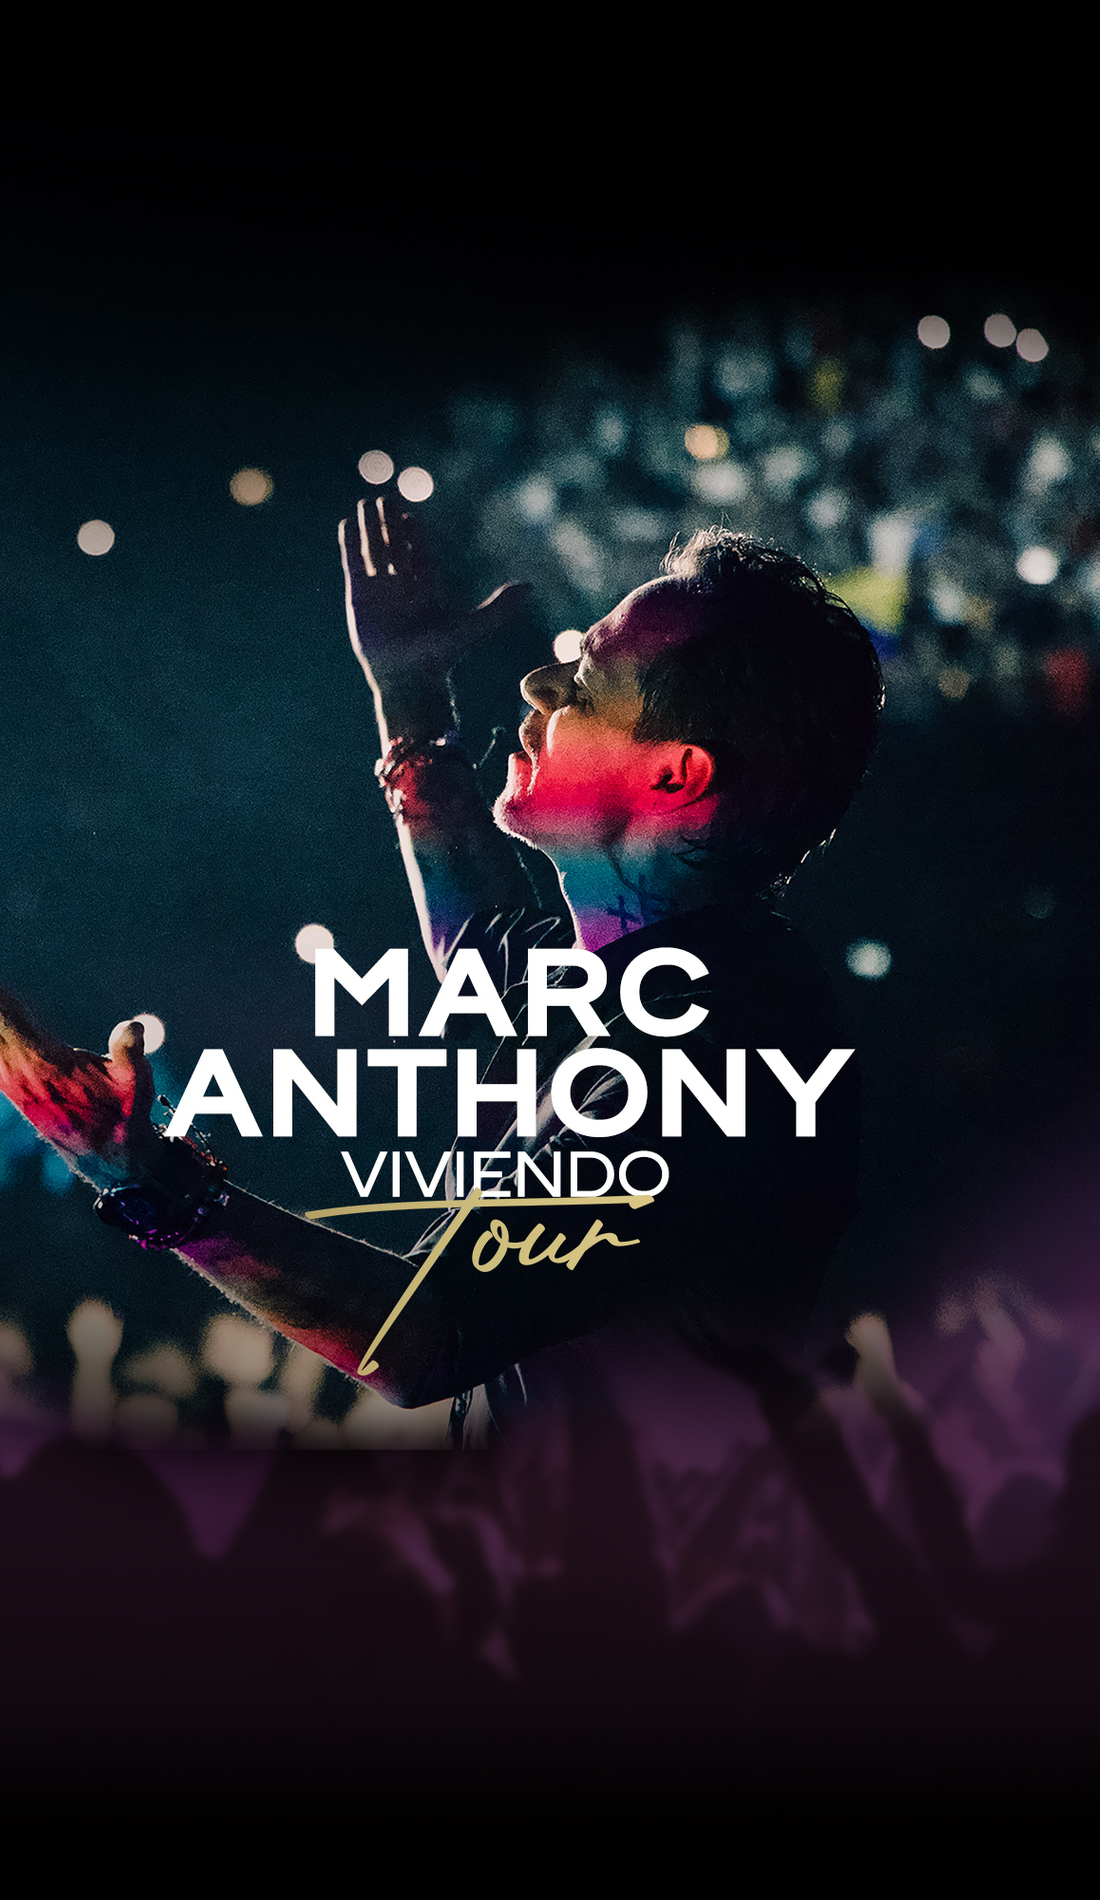 A Marc Anthony live event